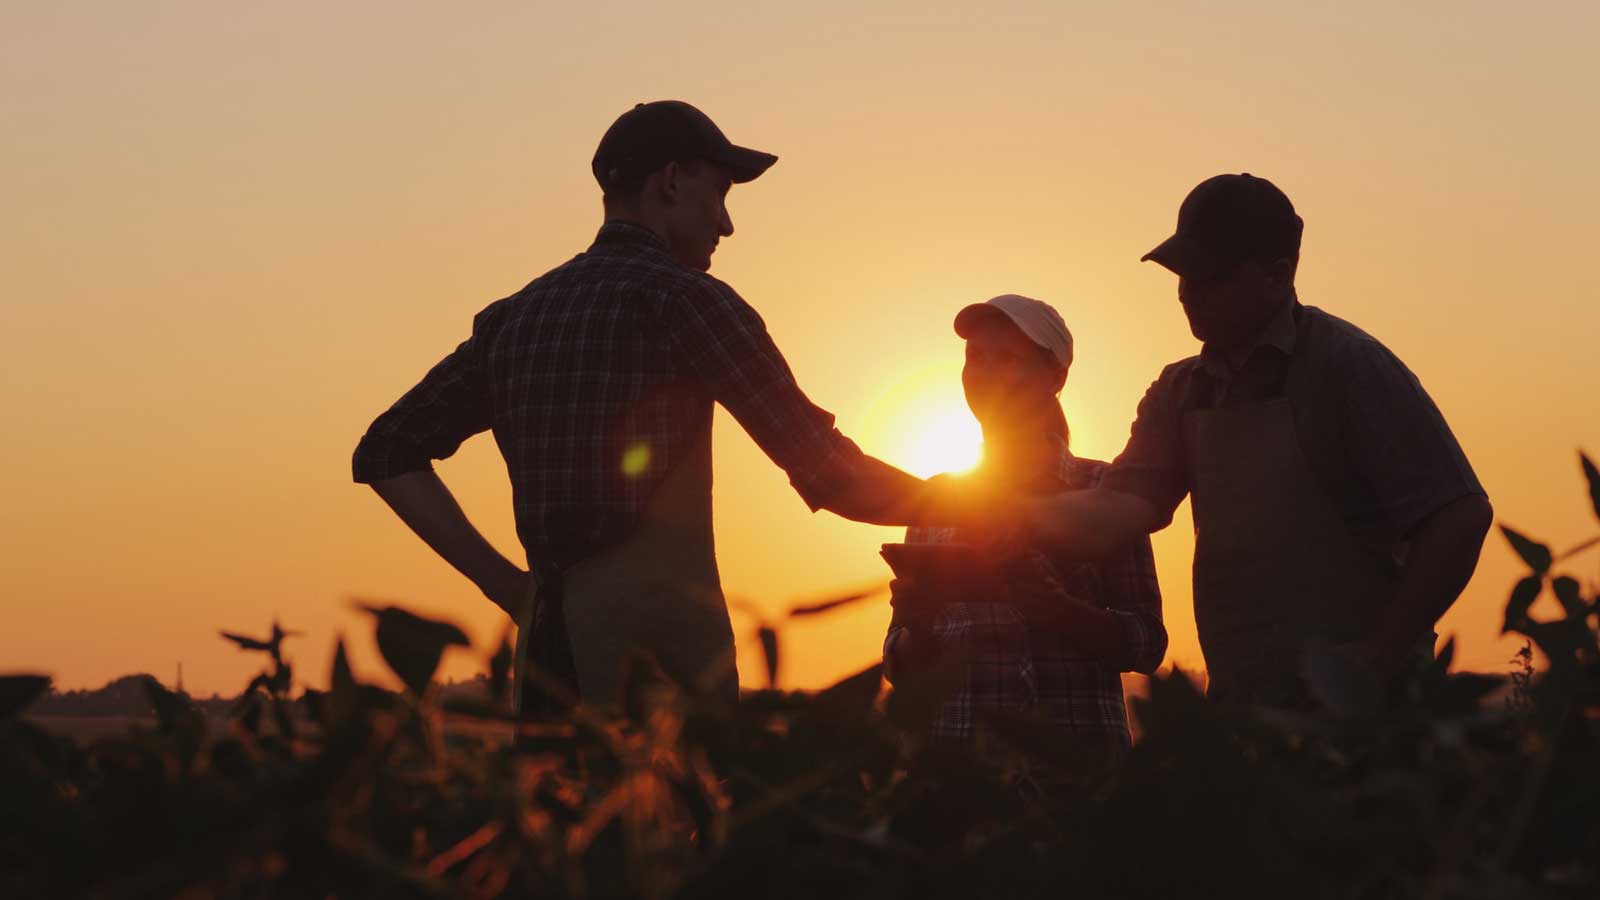 Meeting in fields at sunset